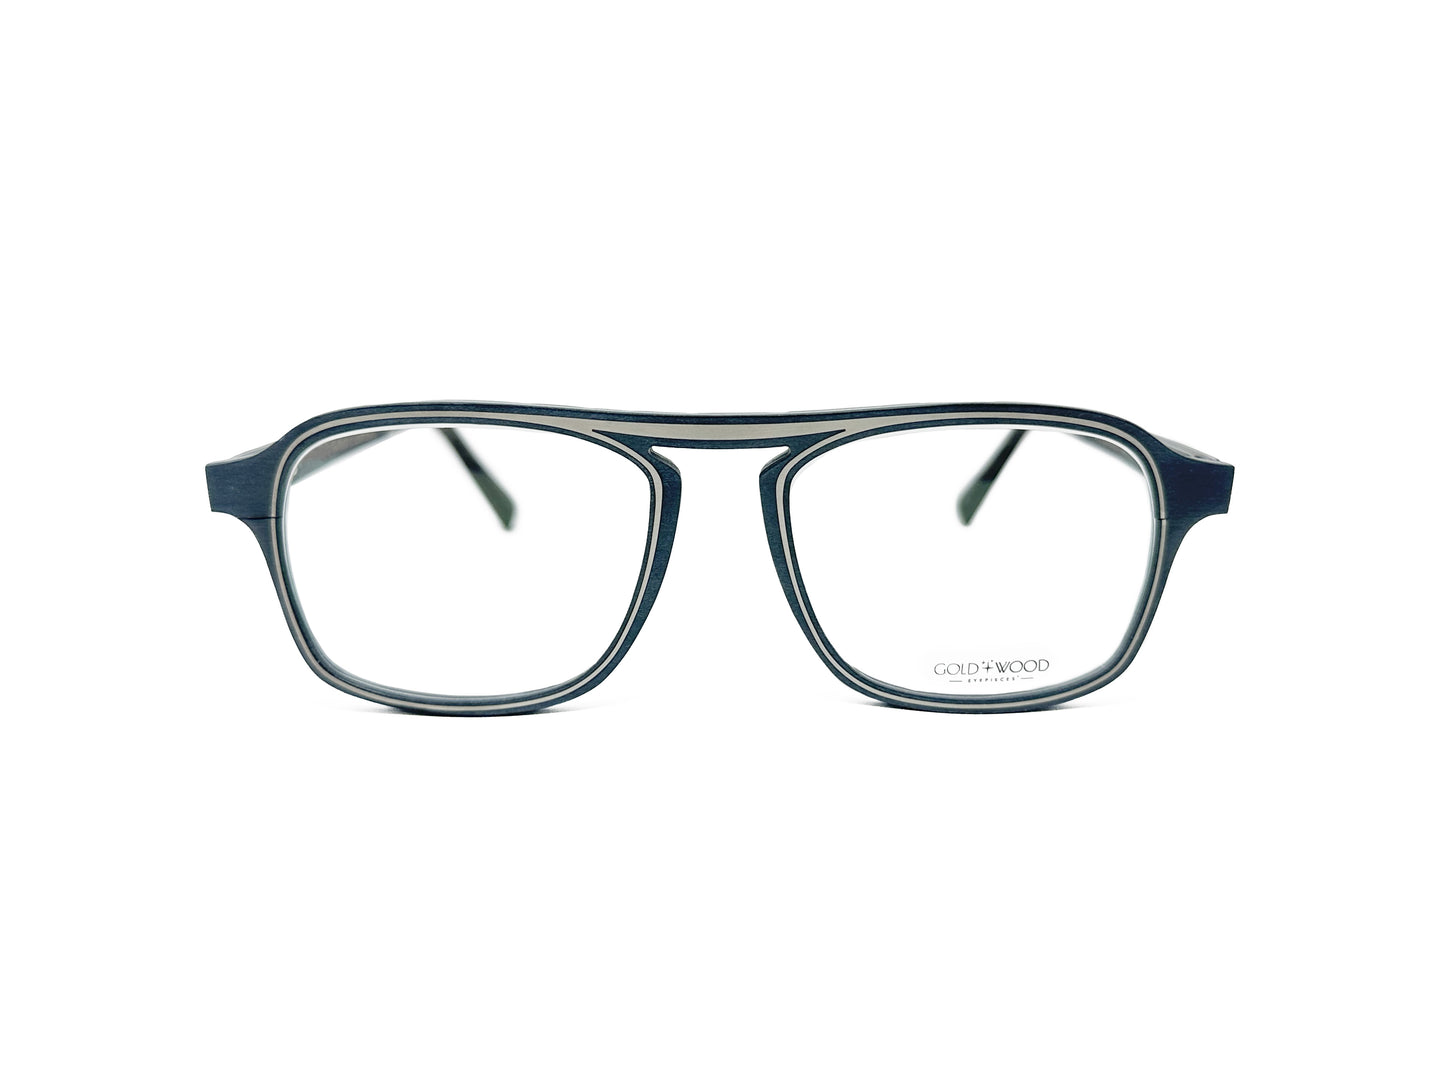 Gold & Wood aviator style optical frame, made from wood. Model: Eris. Color: 01.61 - Dark navy blue with grey trim. Front view. 